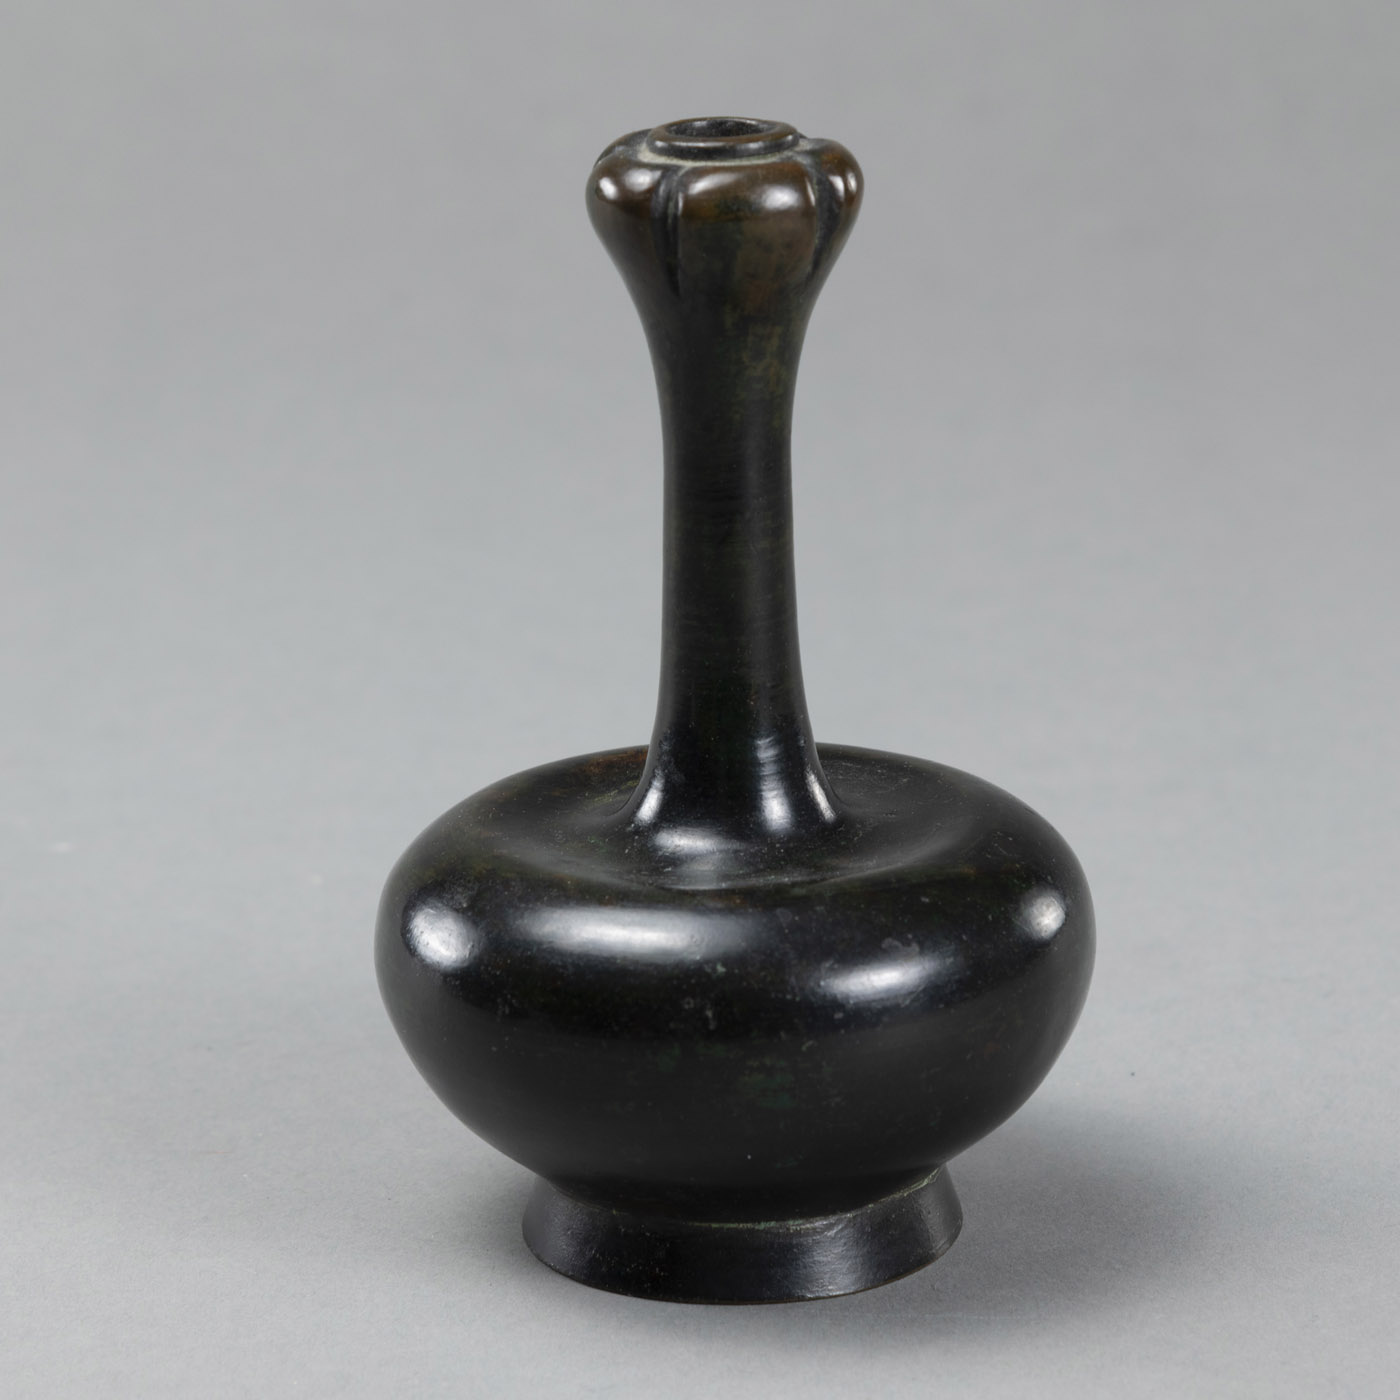 <b>A SMALL LONG-NECKED BRONZE VASE WITH A GARLIC-SHAPED MOUTH</b>